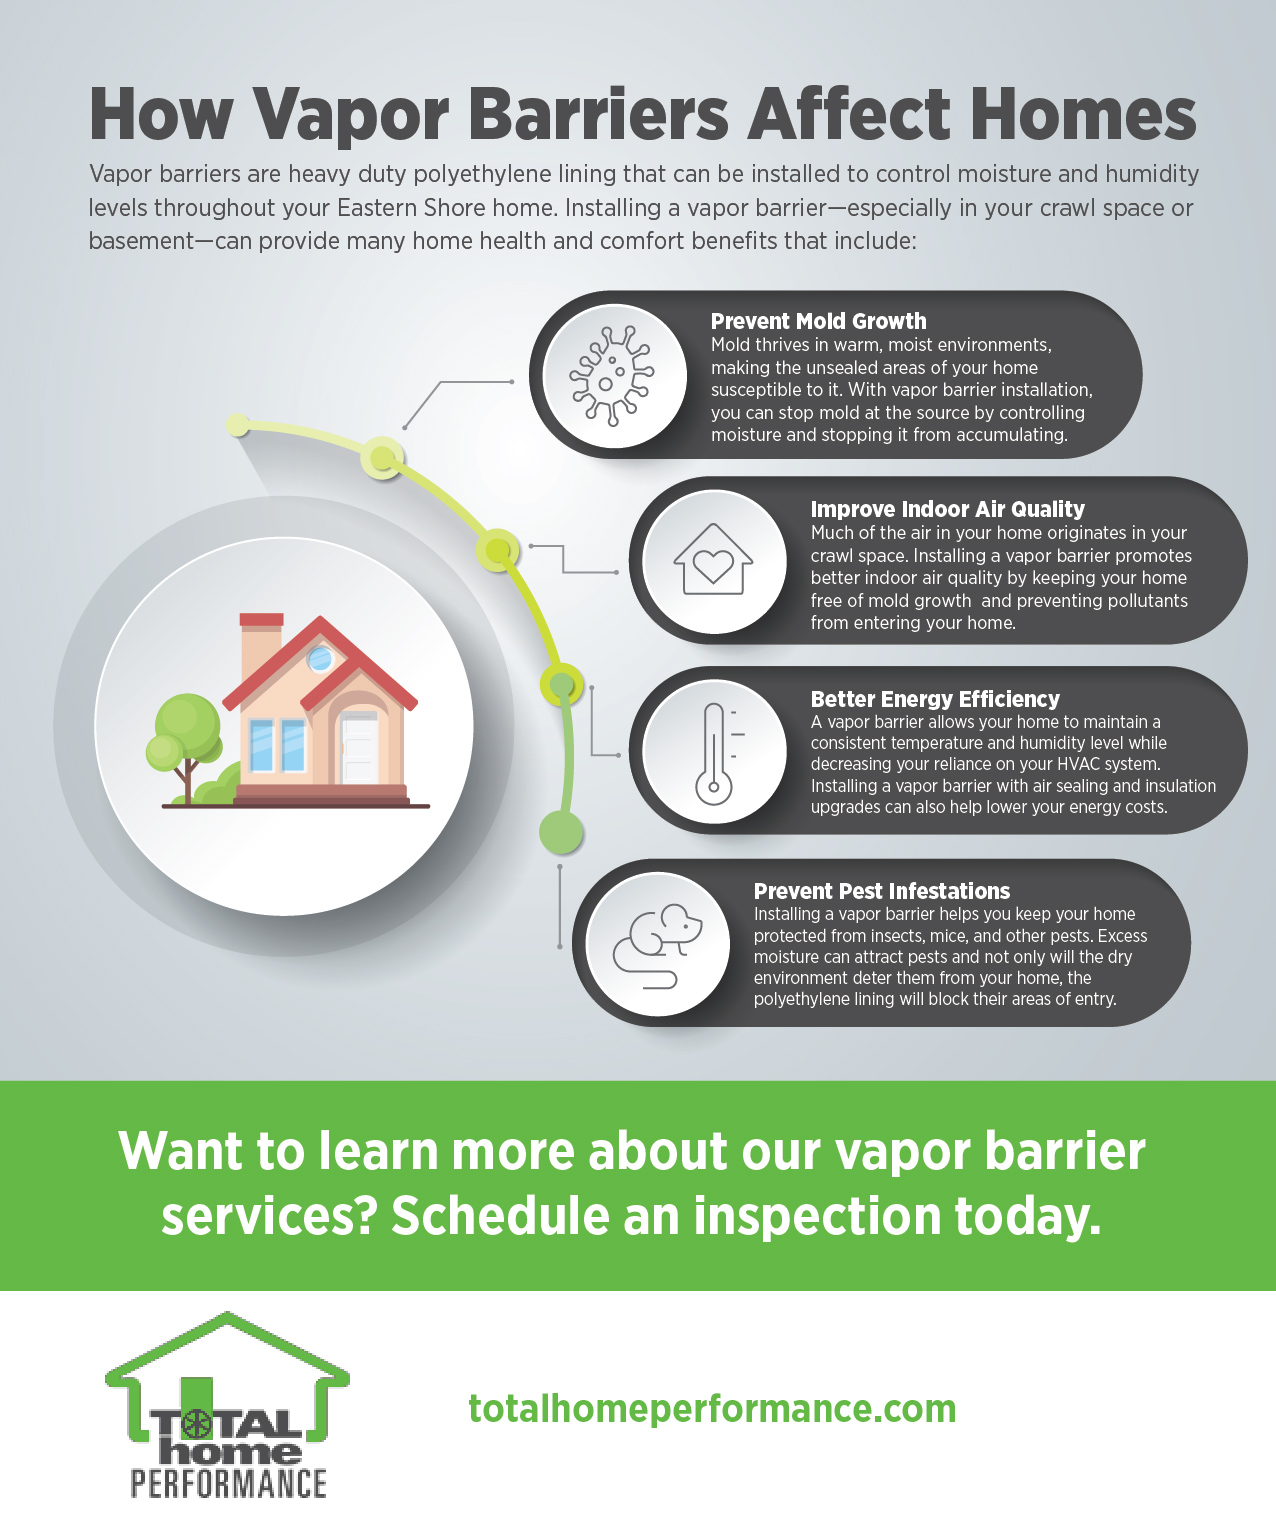 How Vapor Barriers Affect Homes infographic